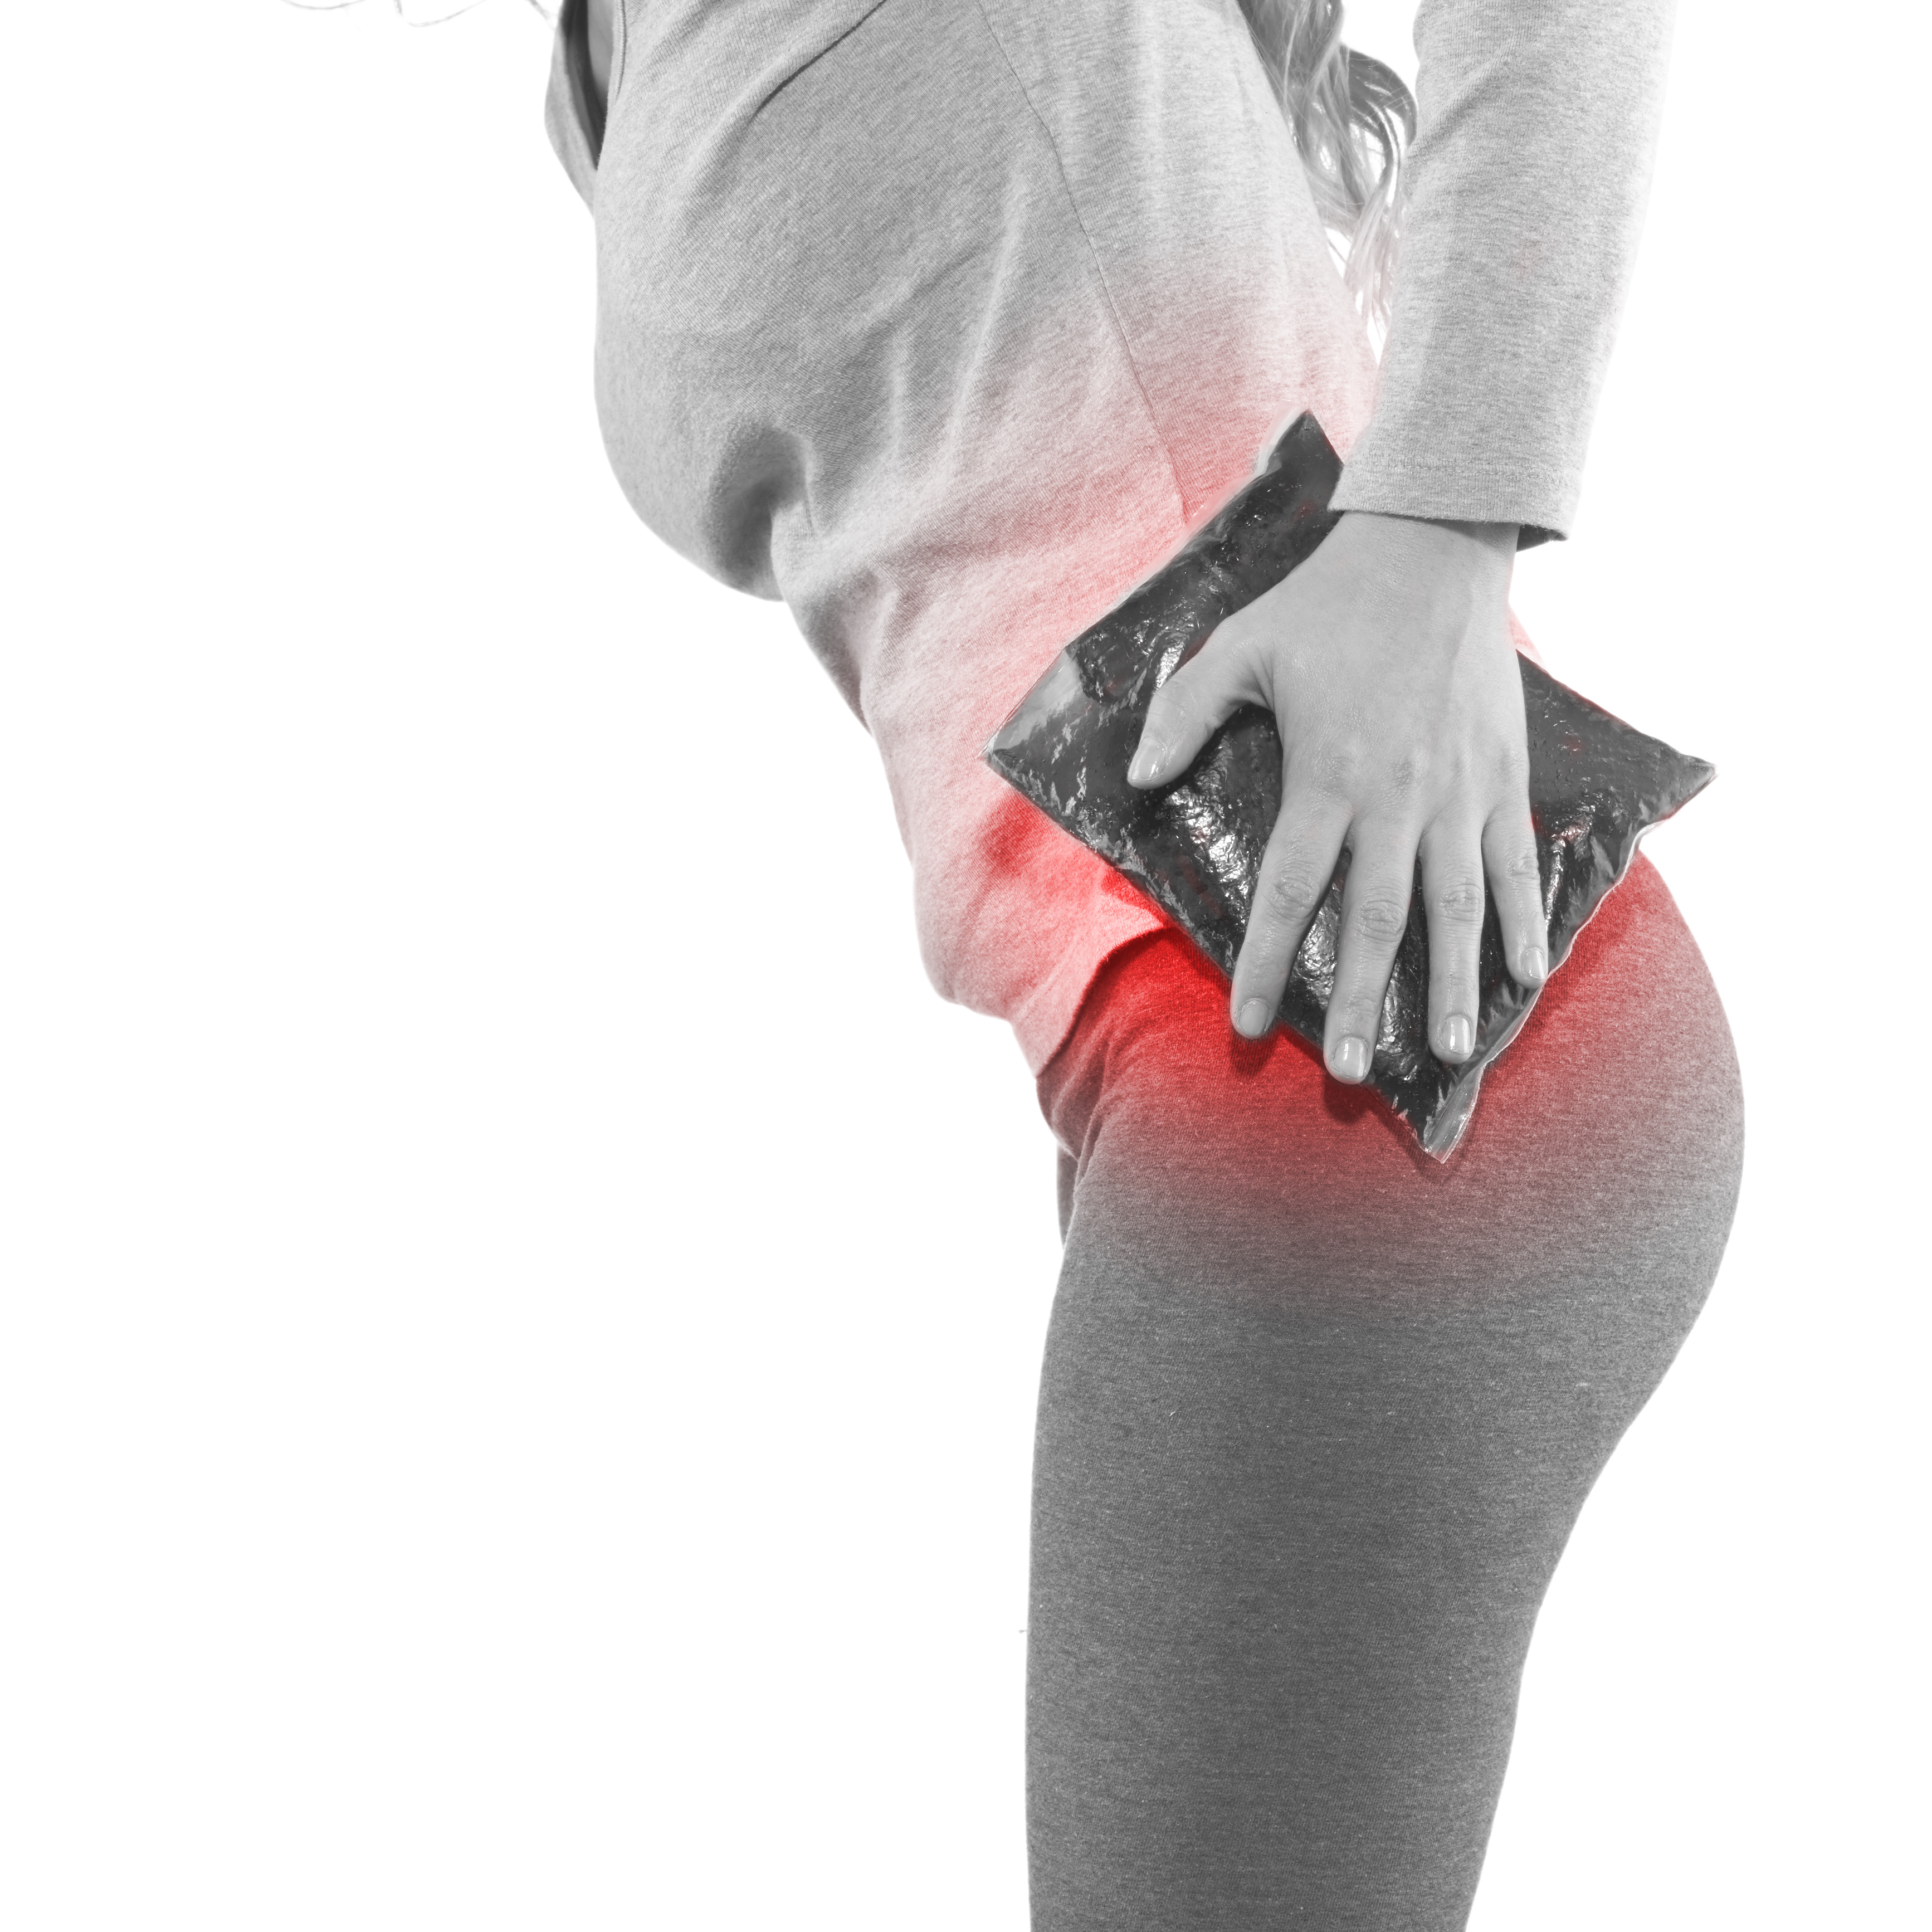 Cool gel pack on a swollen hurting hip. Medical concept photo.